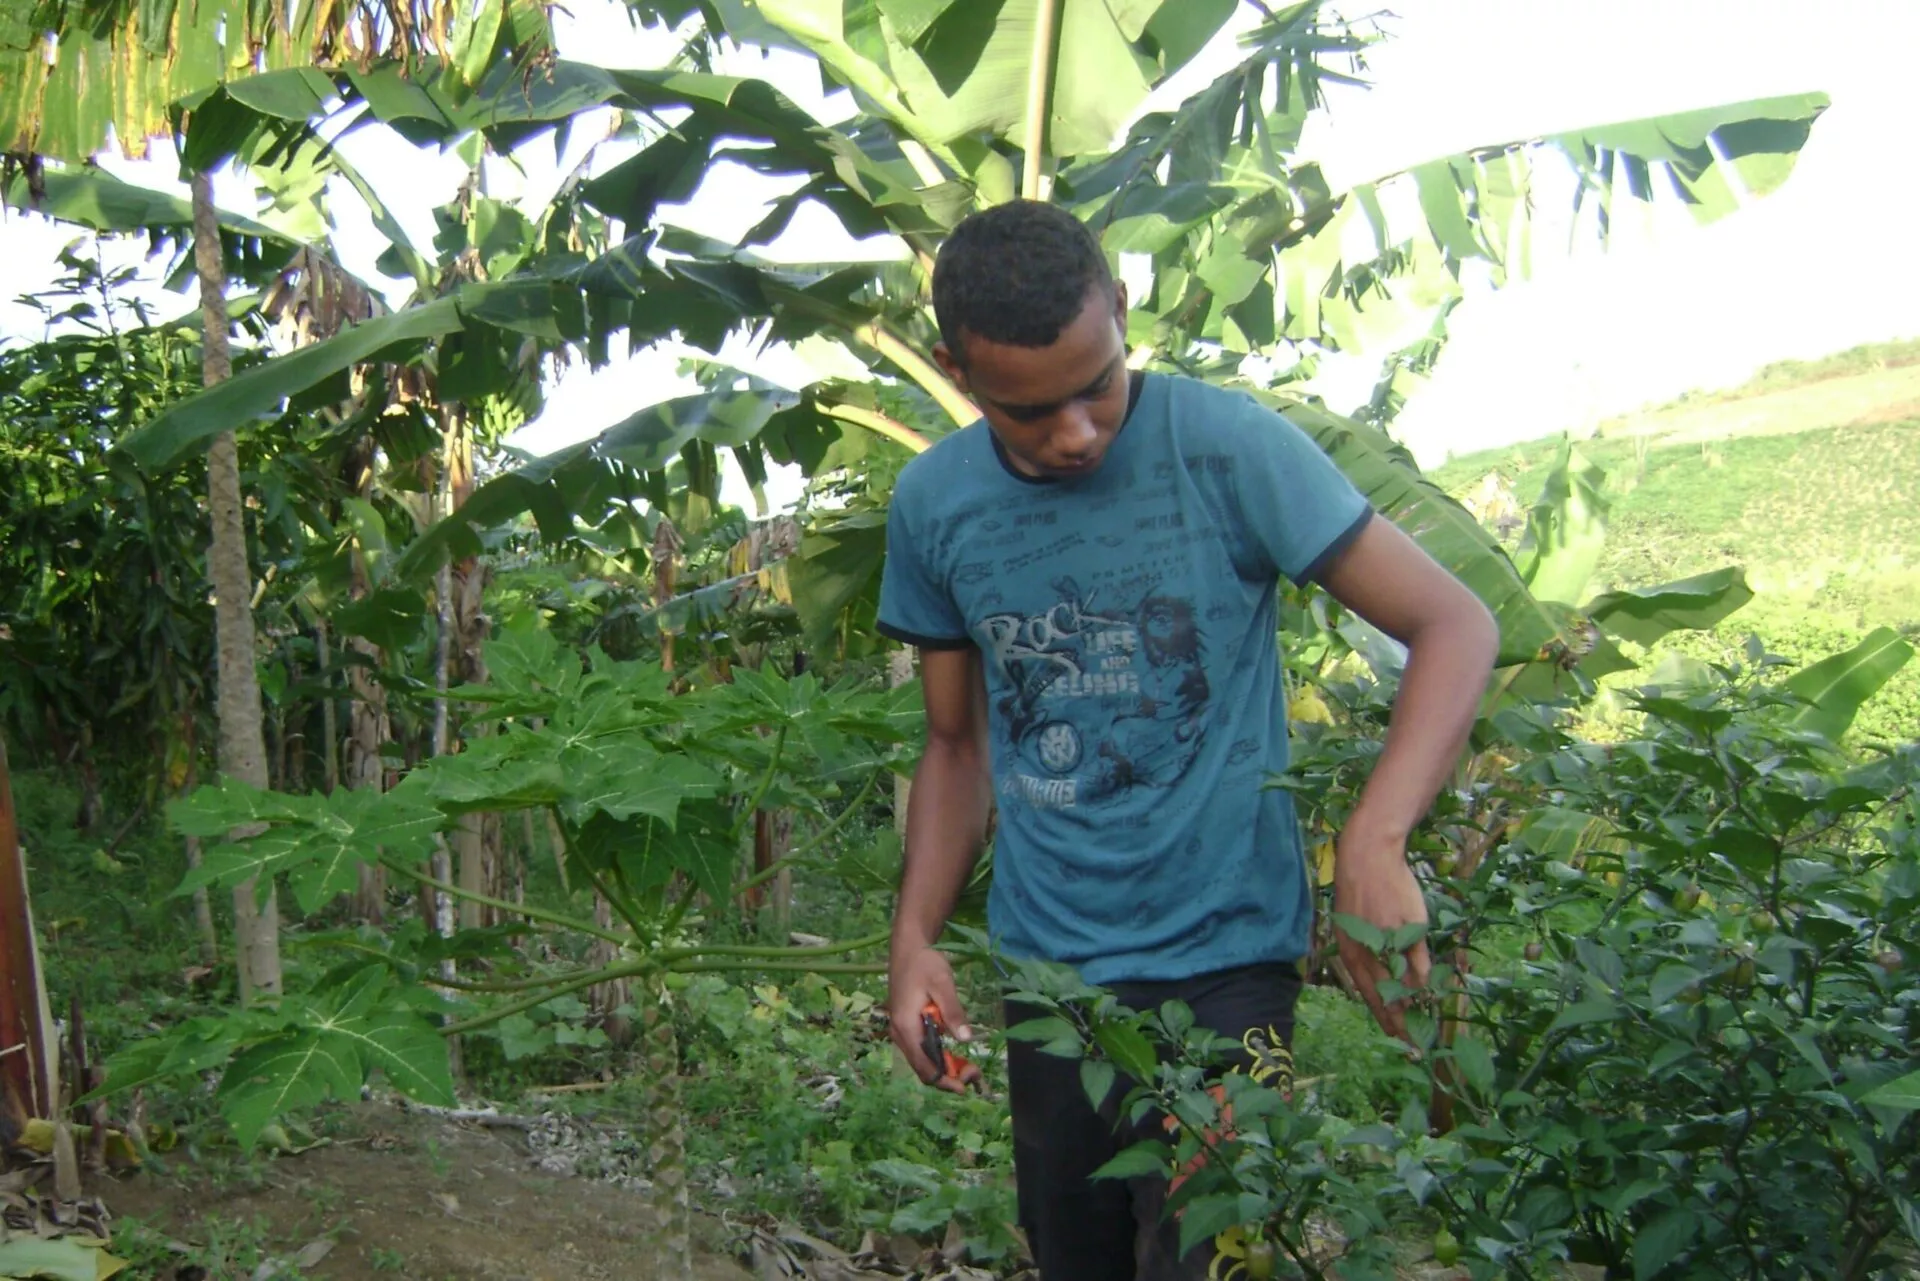 A teenager is pruning his plants in his own plantation with garden shears.